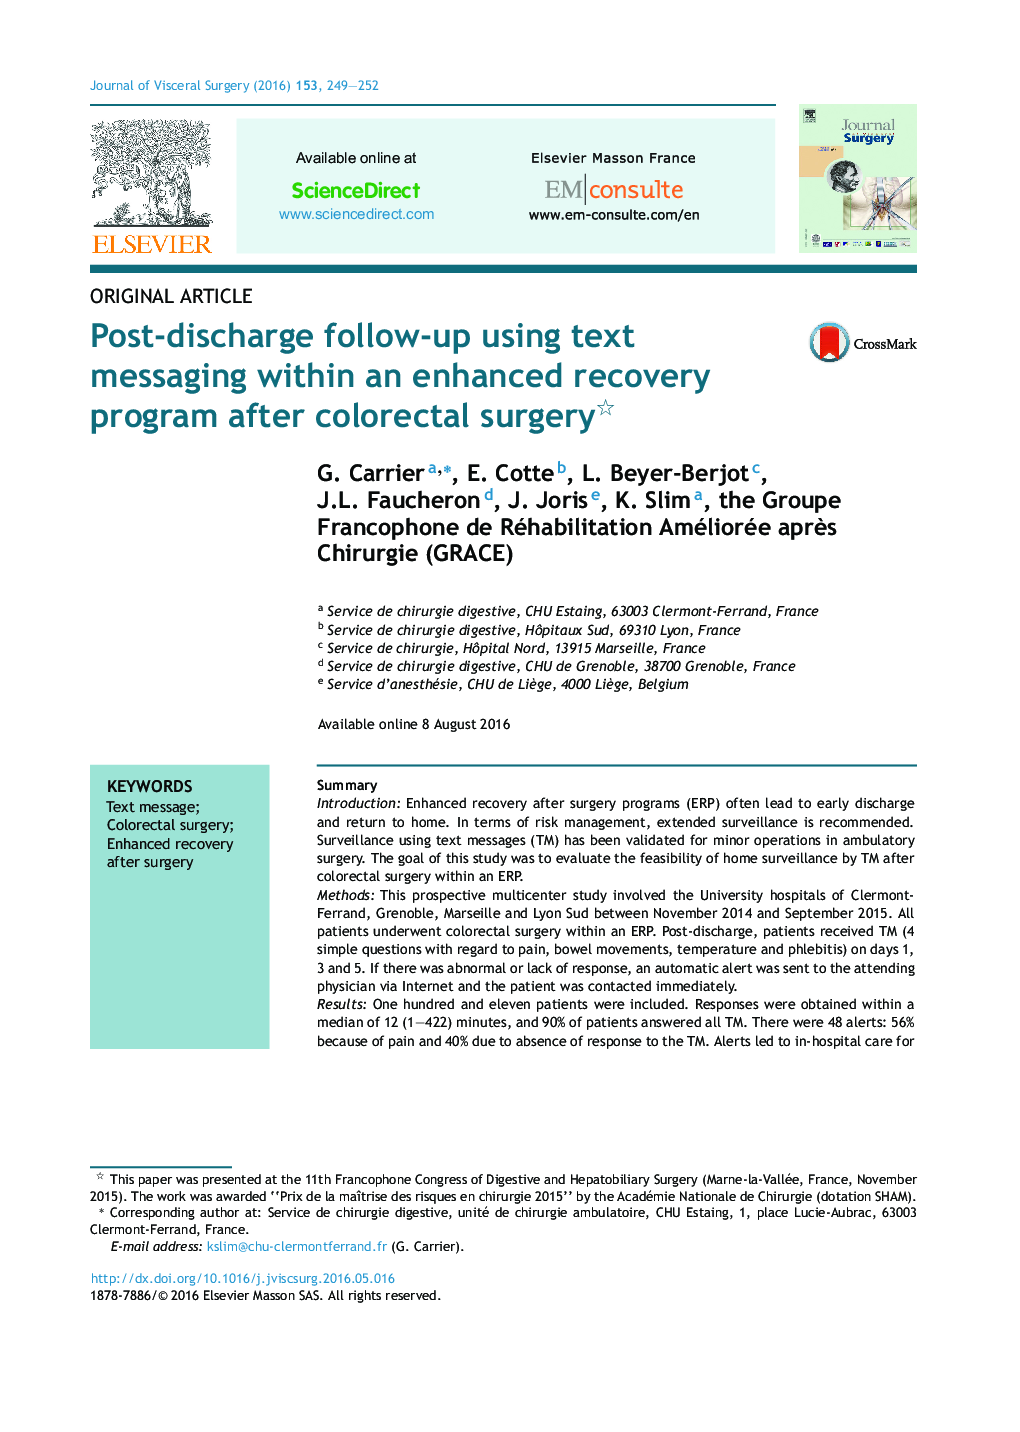 Post-discharge follow-up using text messaging within an enhanced recovery program after colorectal surgery 